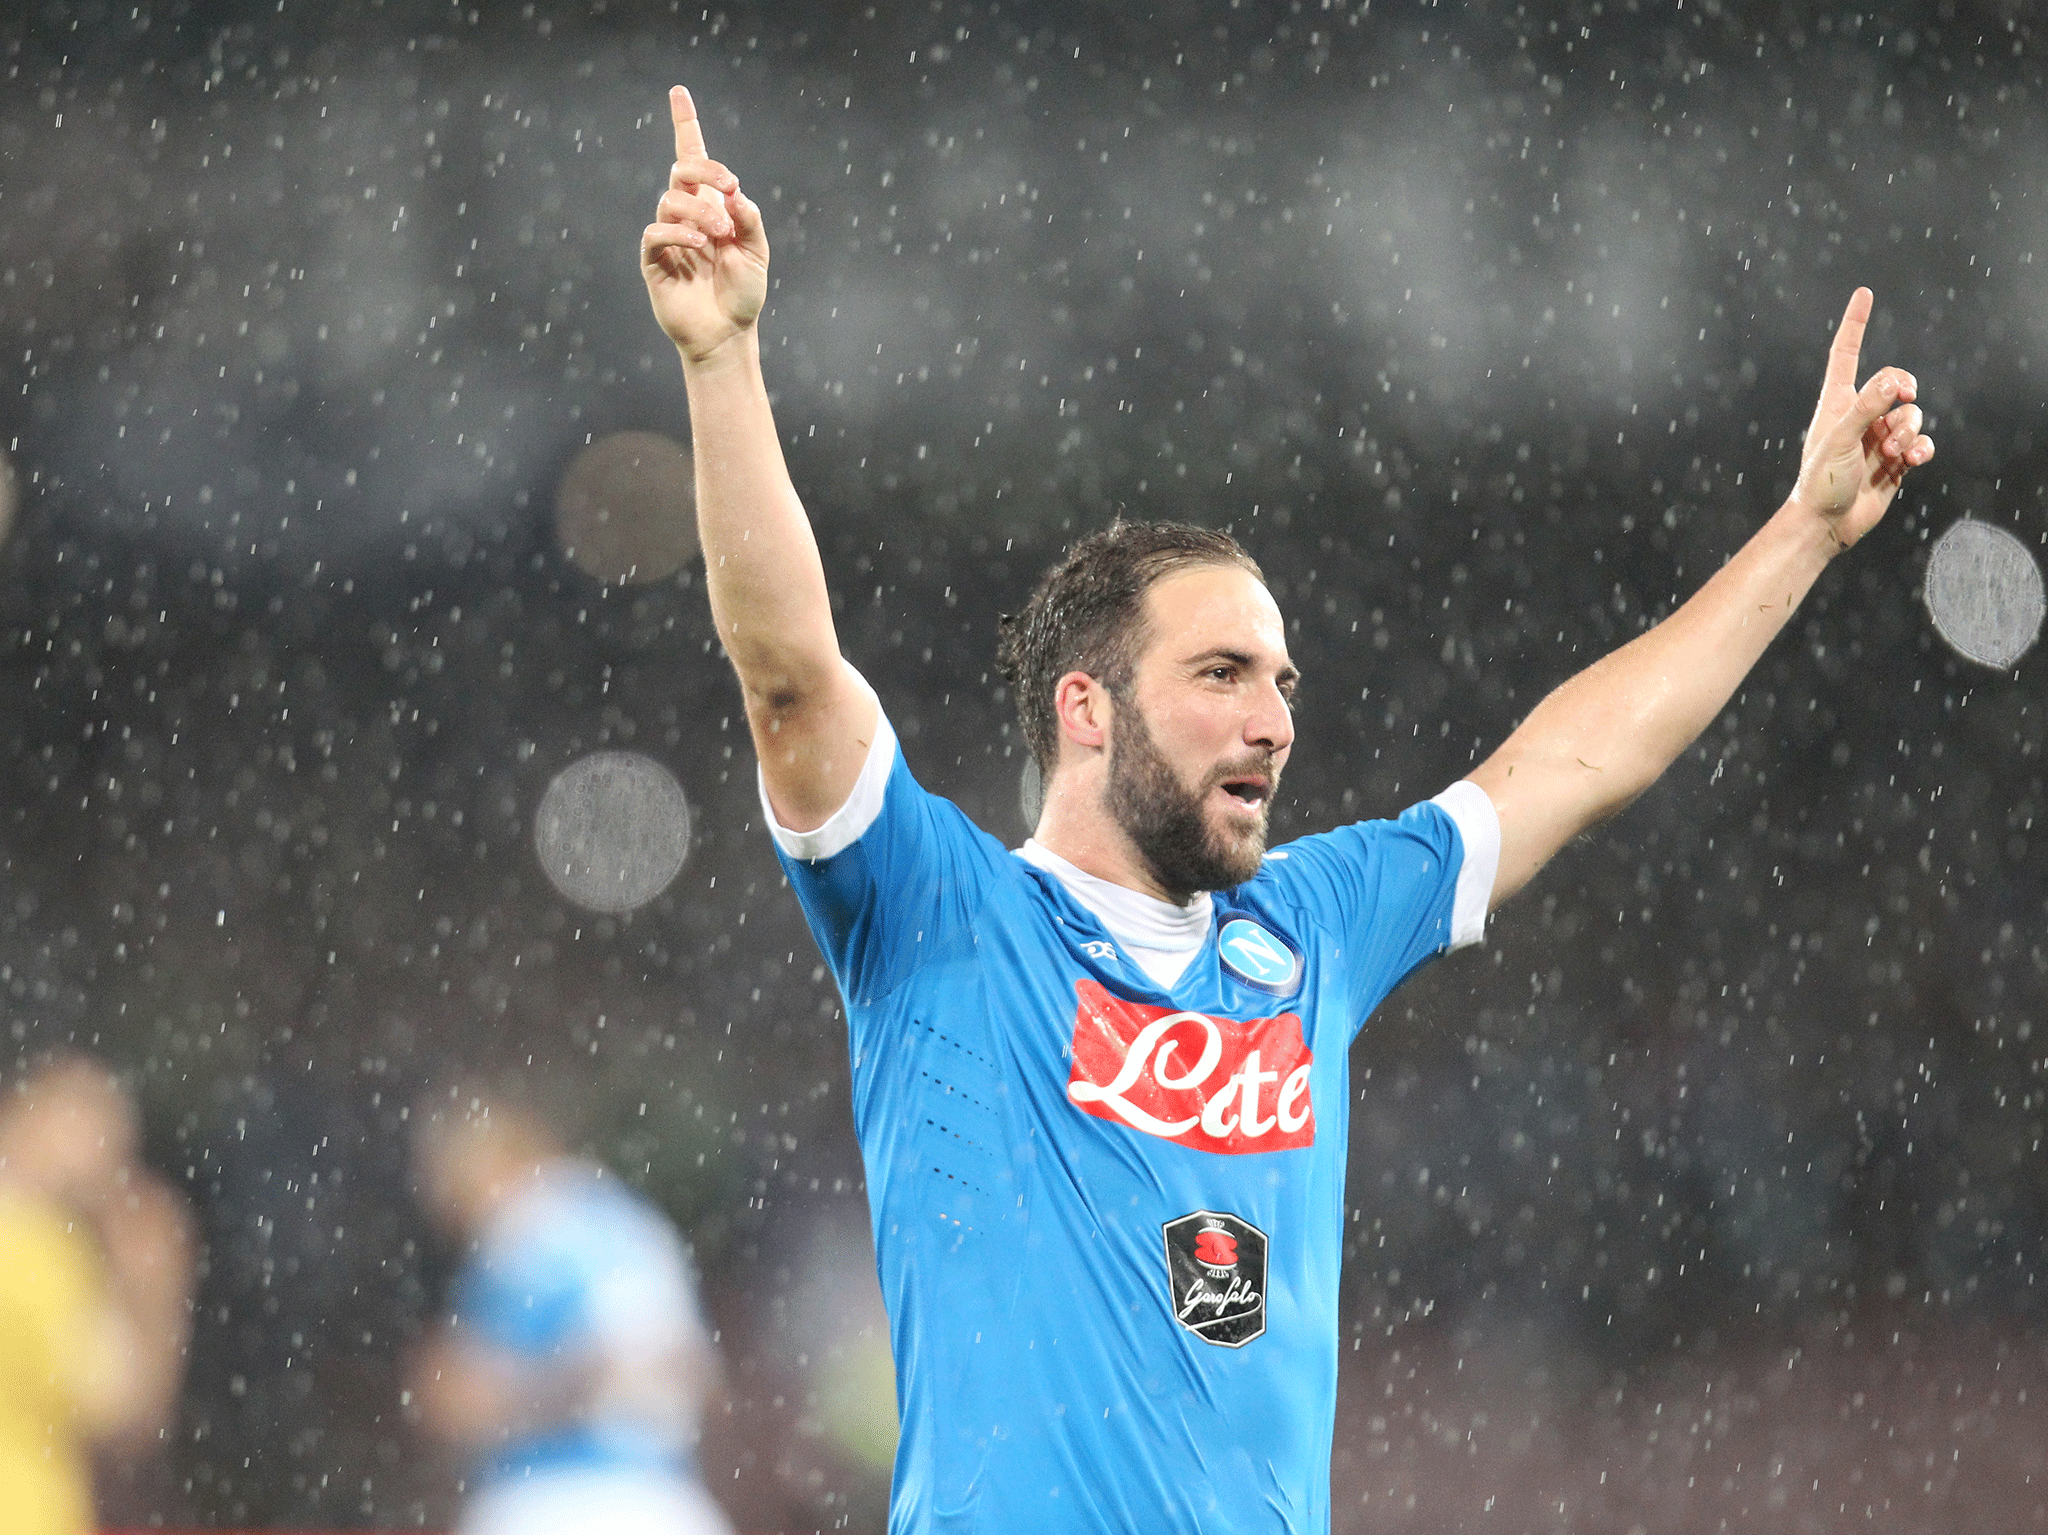 Gonzalo Higuain makes the switch from Napoli to rivals Juventus